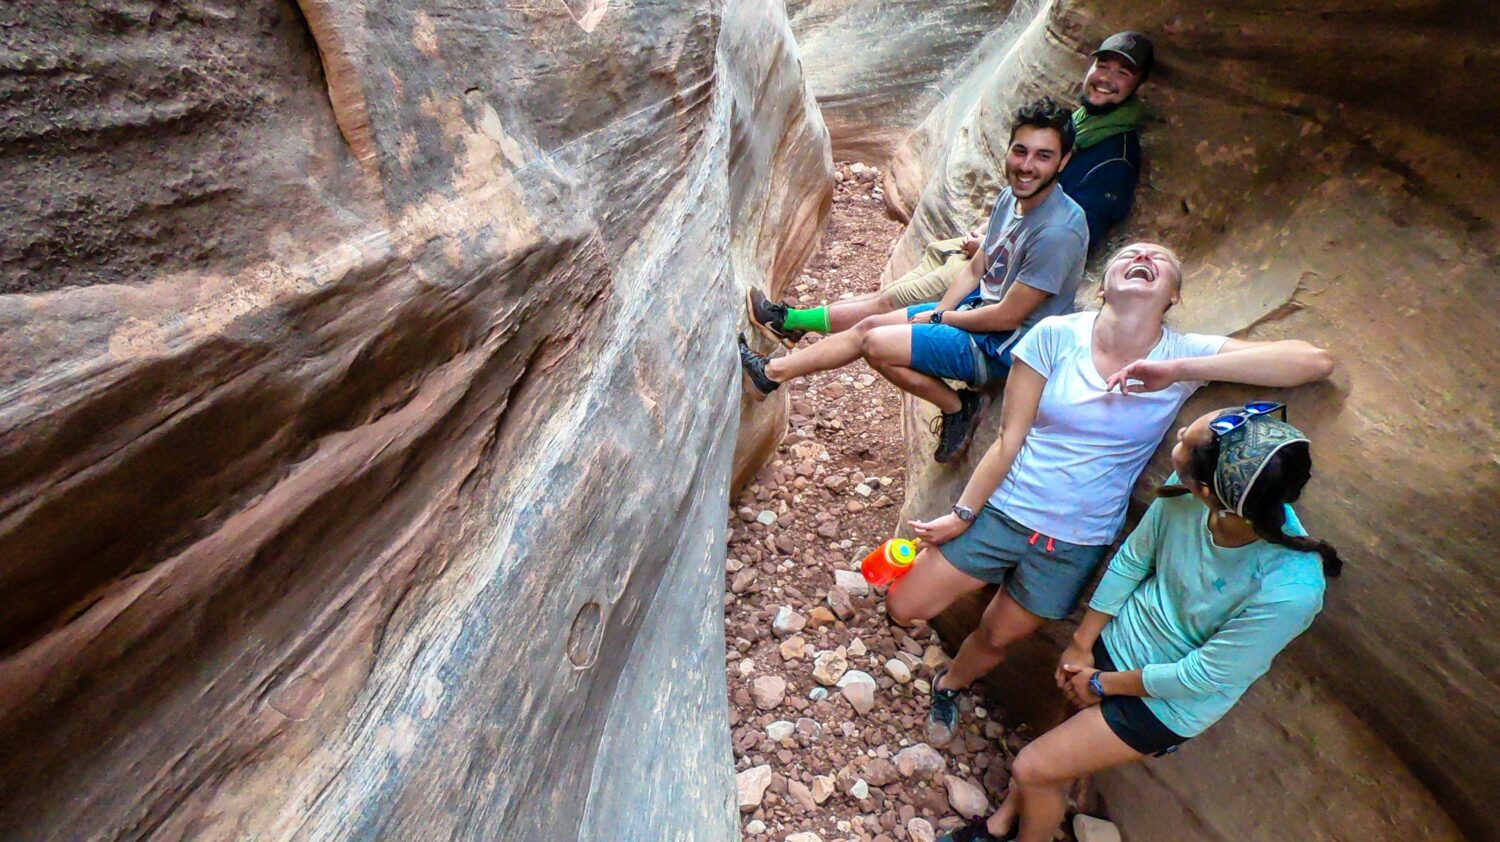 Rappel into remote slot canyons and learn about their formation